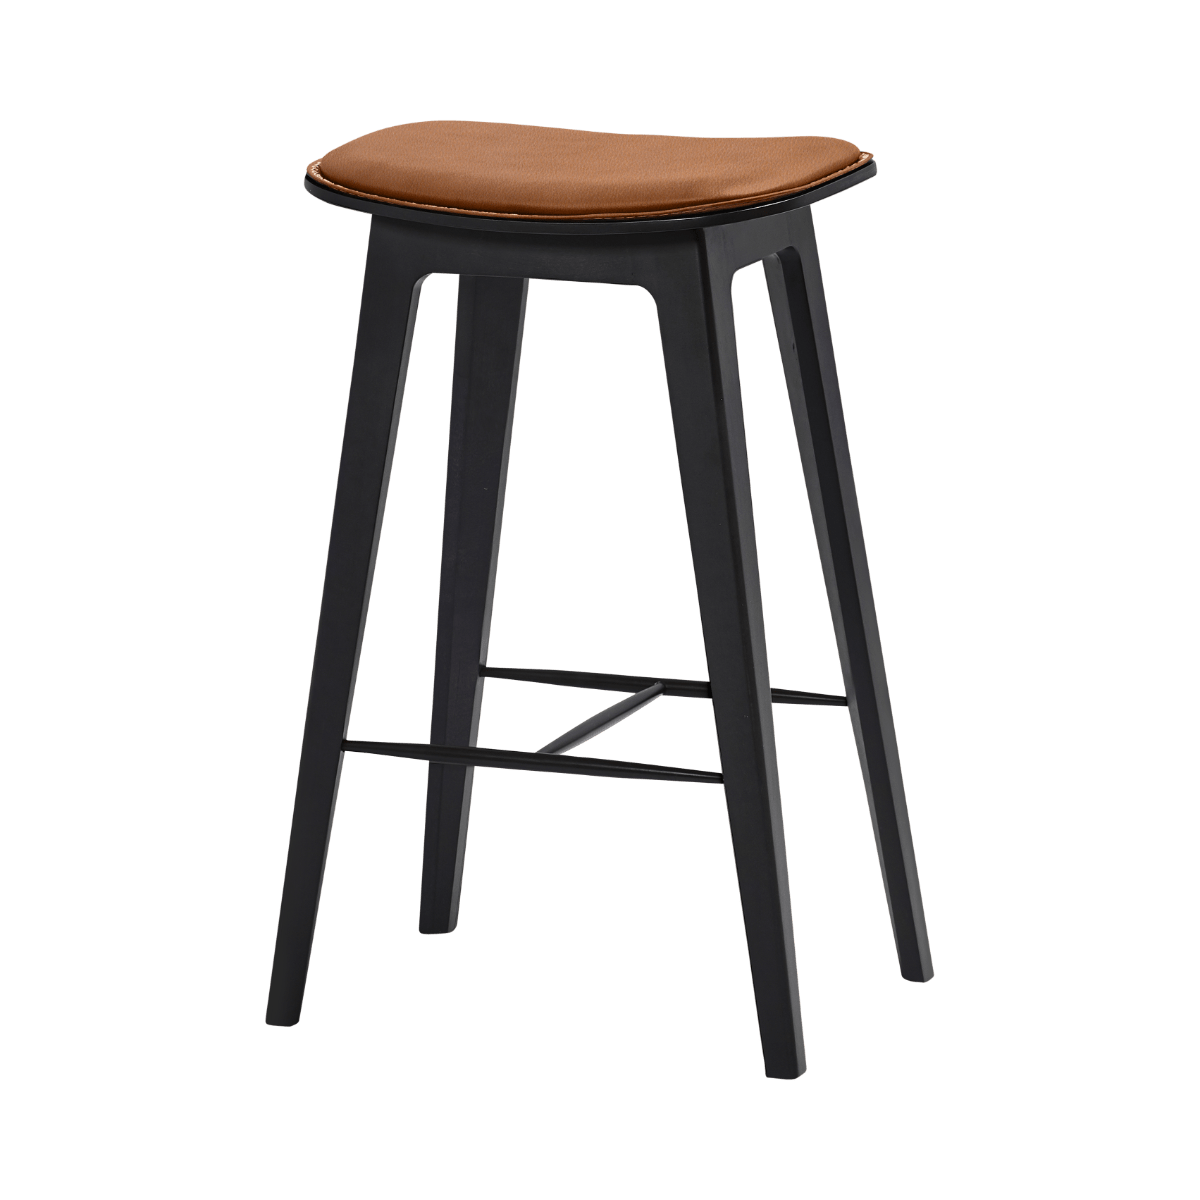 variant_8594311% | Nordic Bar Stool - Beech with stitches [Contract] - 68 cm Terra Safari | SACKit